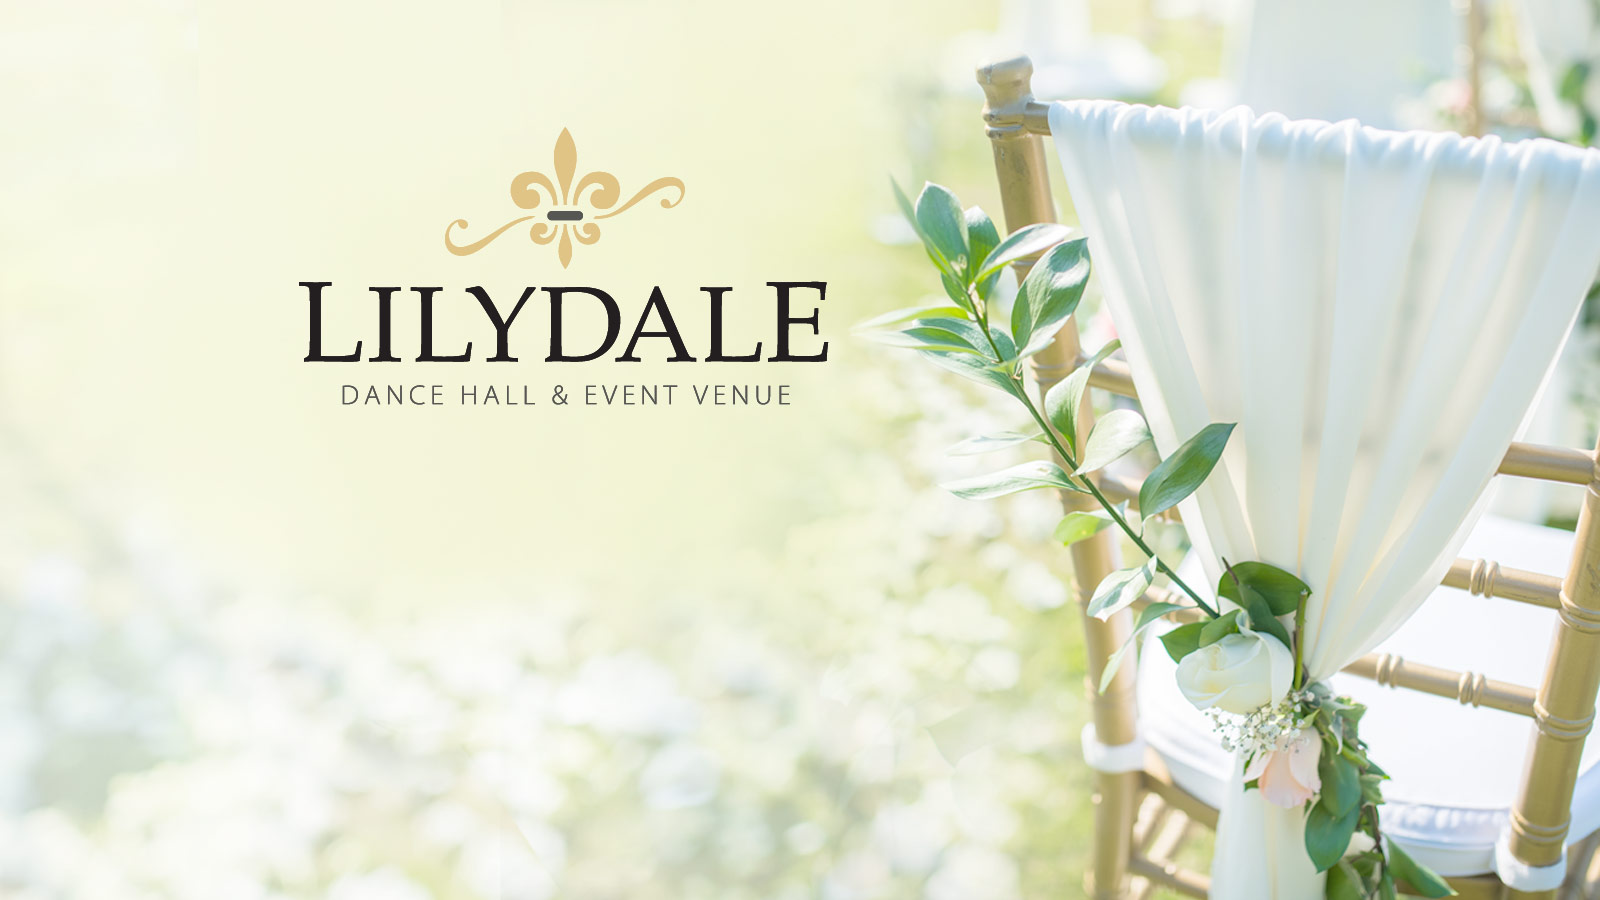 Lilydale Dance Hall and Event Venue